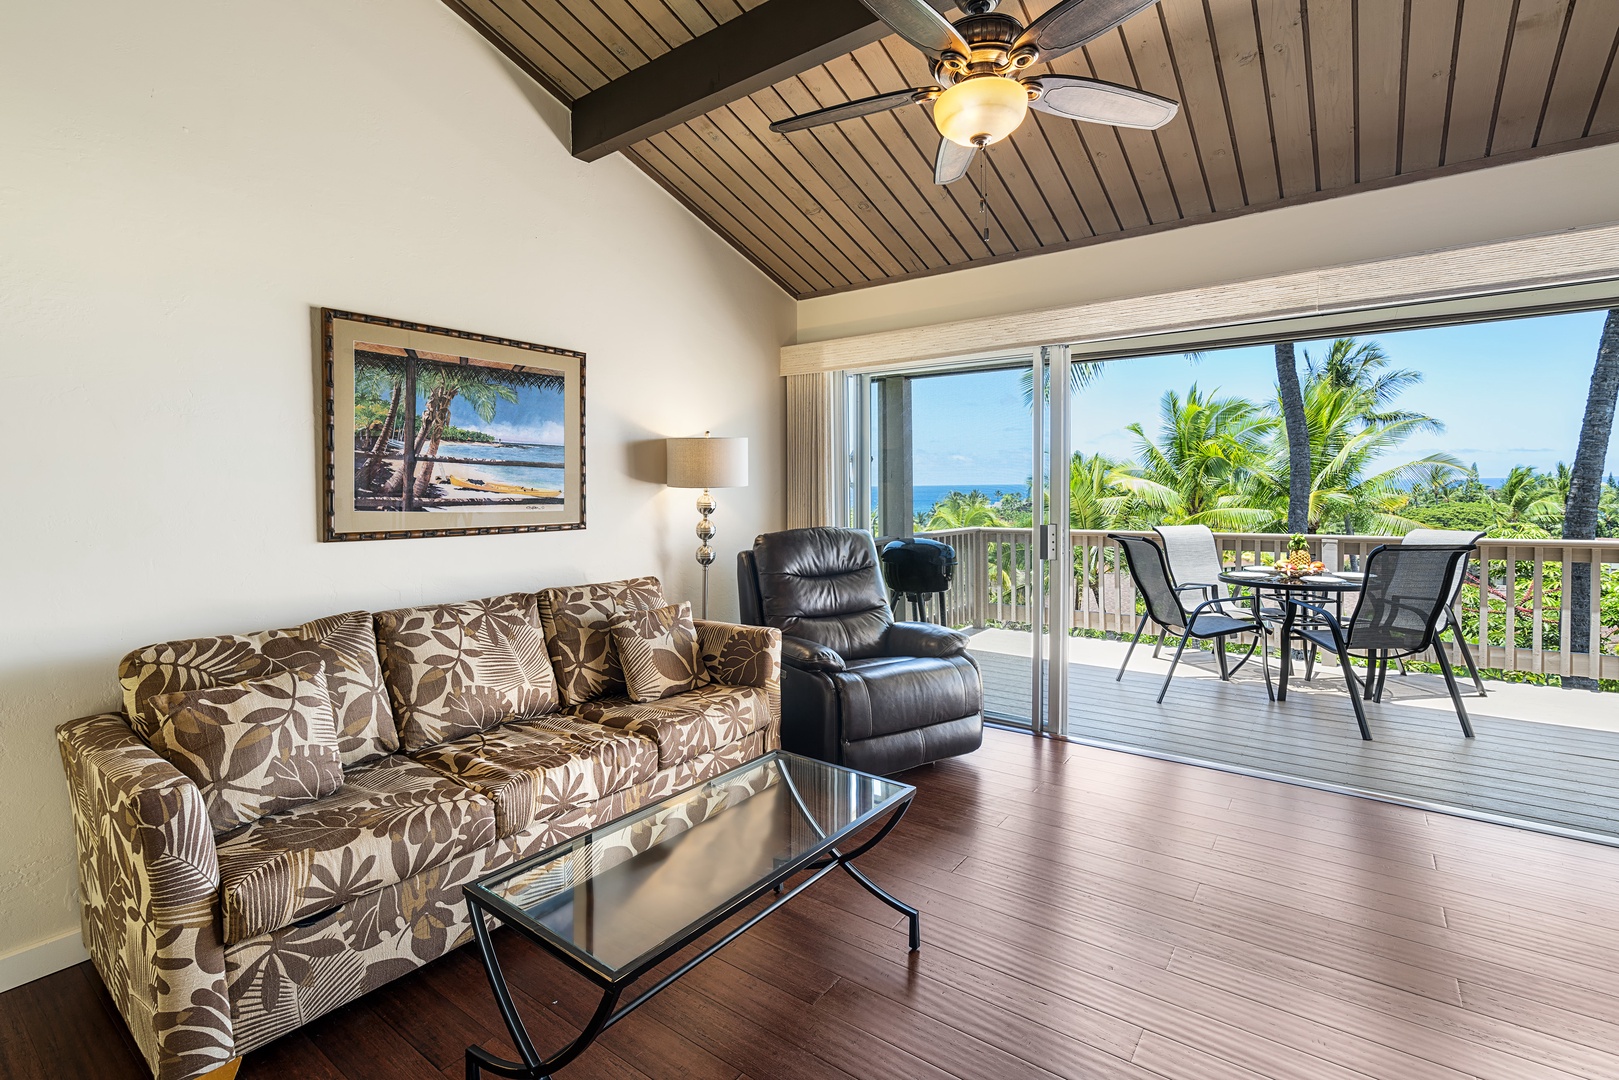 Kailua Kona Vacation Rentals, Keauhou Resort 113 - Electric recliner for the days you just want to relax with a nice book!